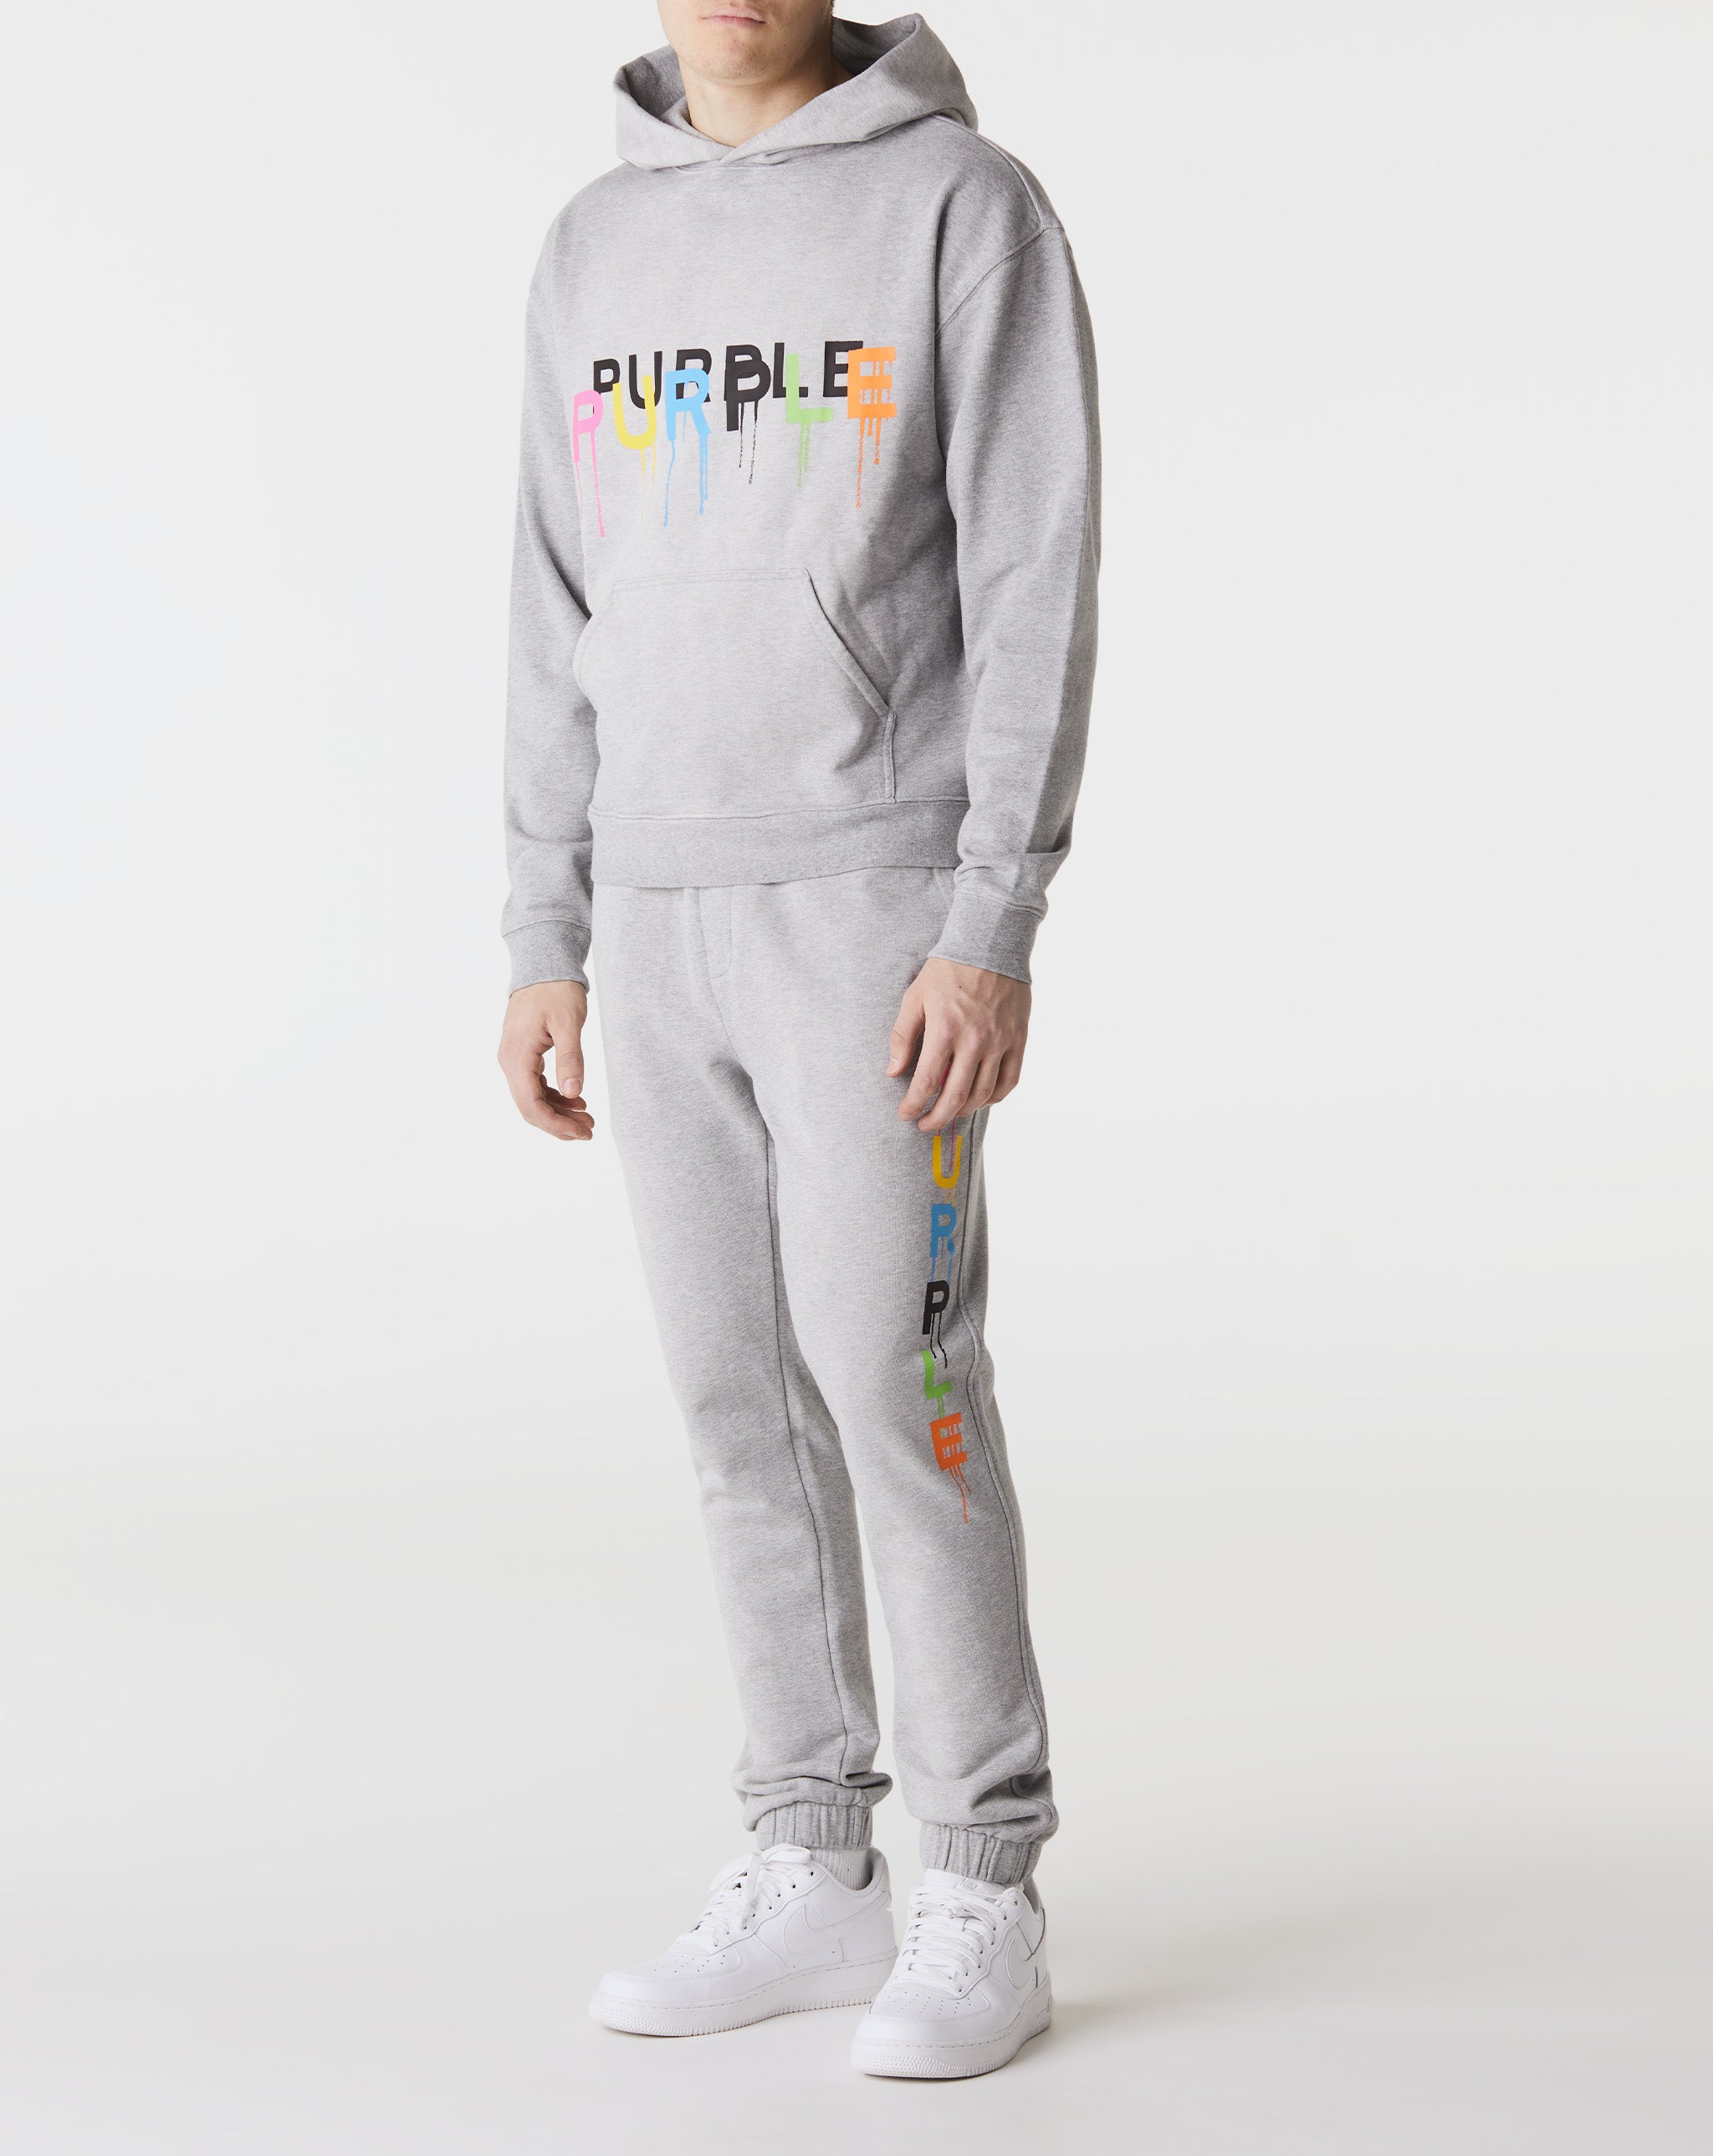 Purple Brand French Terry Pullover Hoodie - Rule of Next Apparel